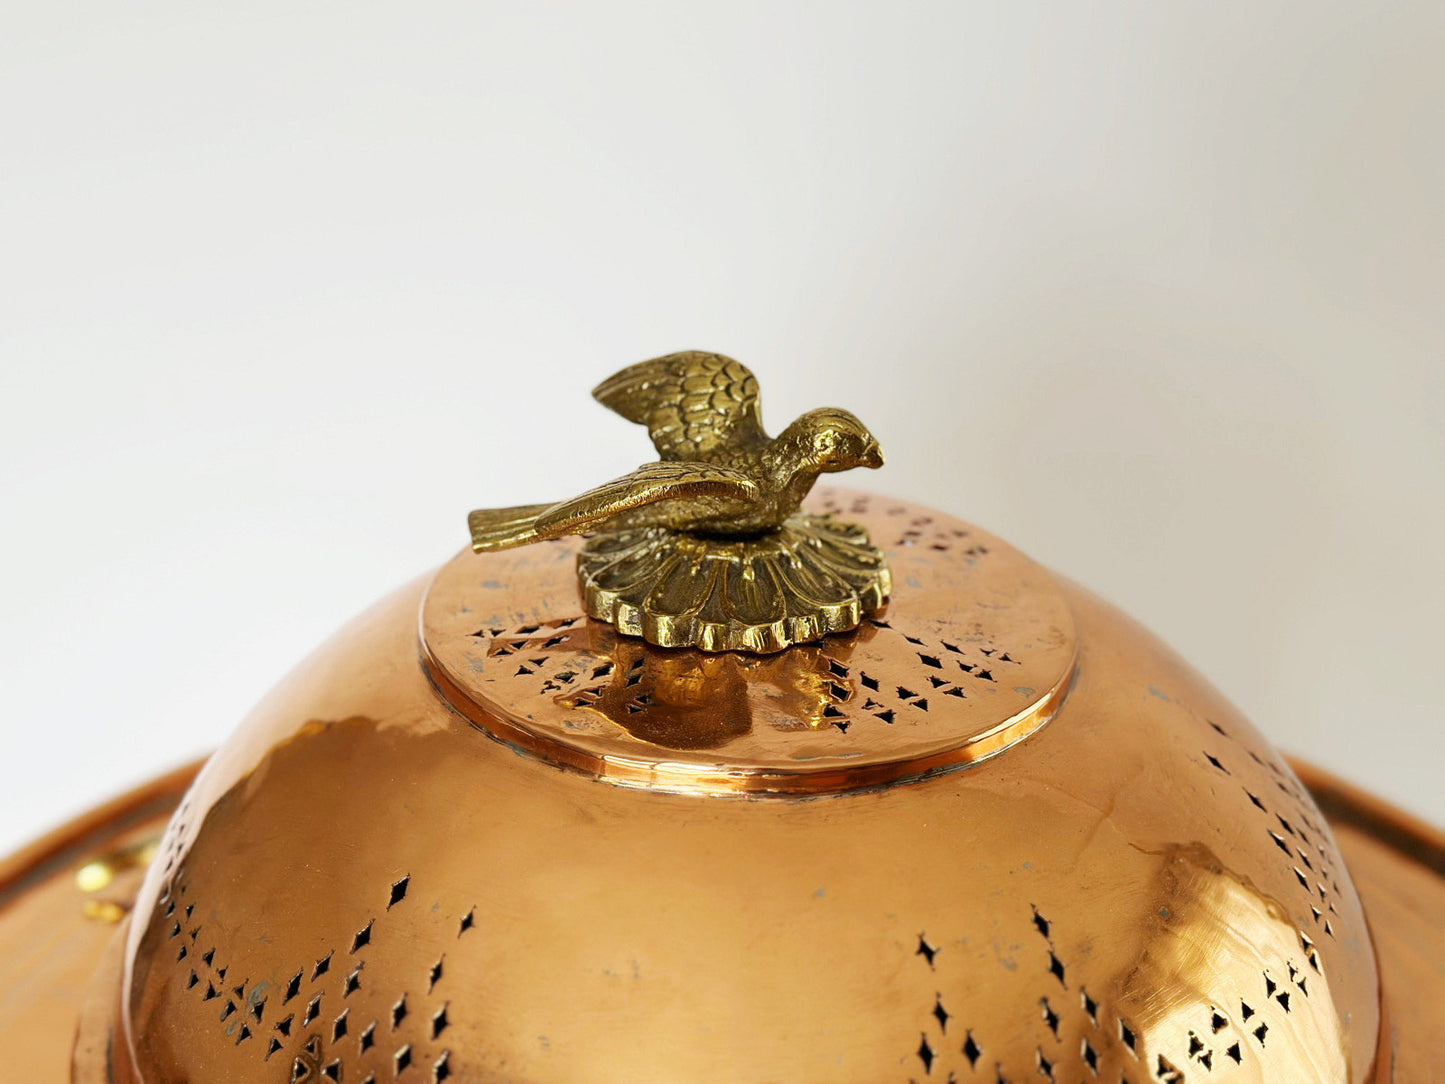 The top vented dome of the vintage Turkish copper brazier fire pit features a decorative brass bird handle to lift off the top. The vented holes of the dome cover form a mix of horizontal and vertical line patterns around the dome.